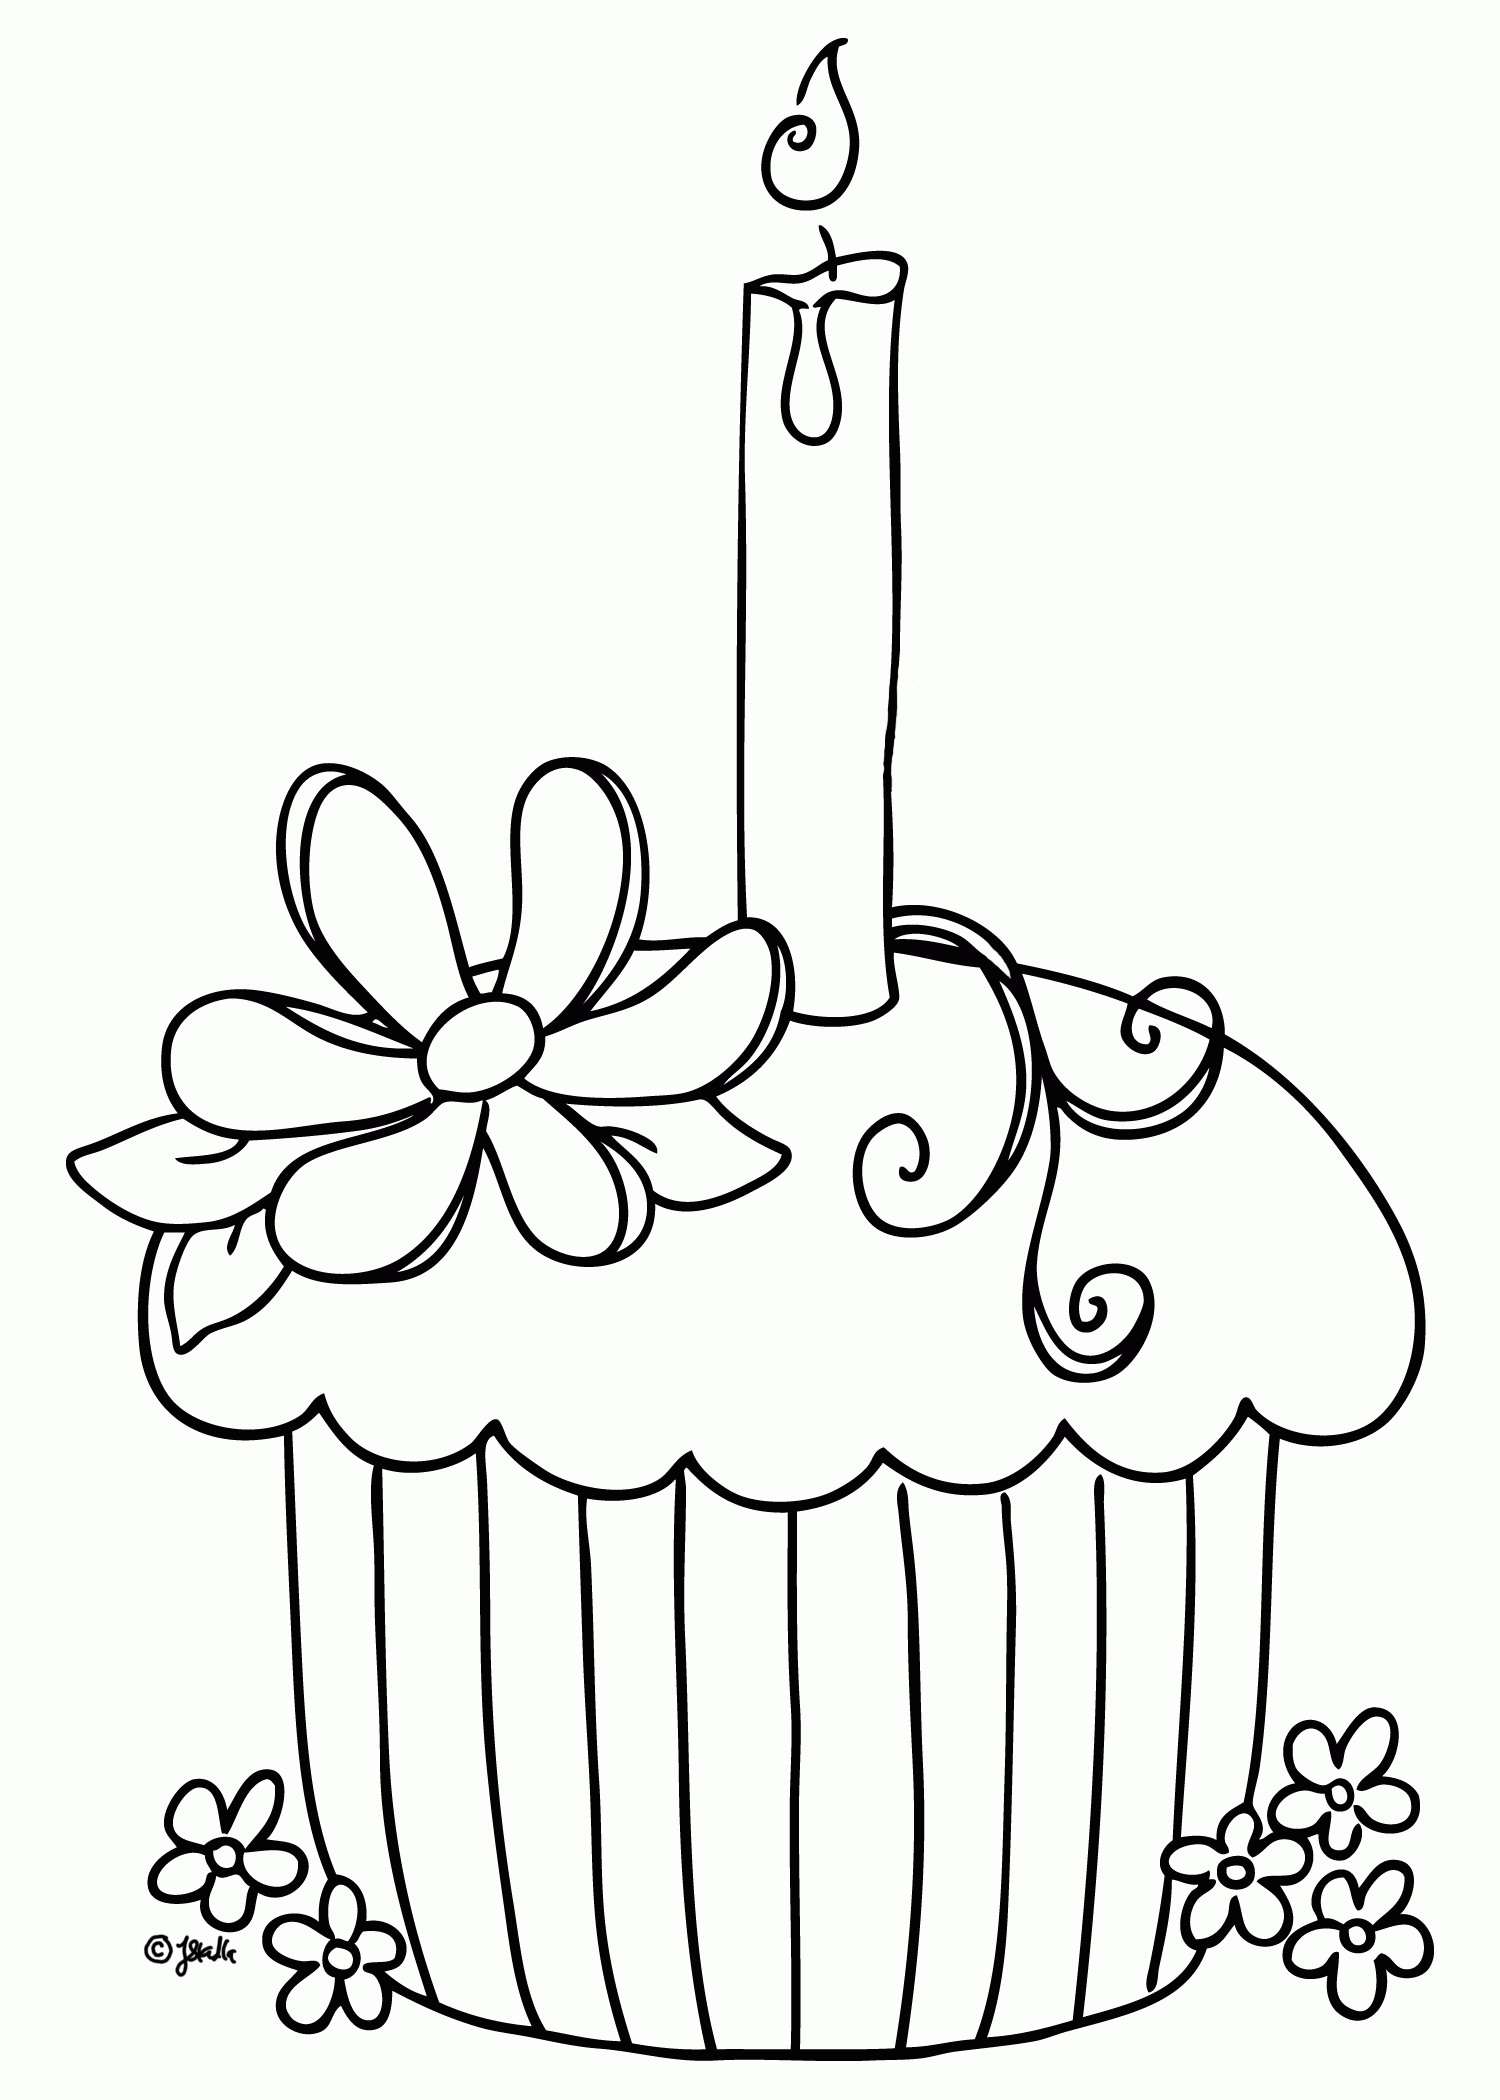 Document Free Printable Cupcake| Coloring Pages for Kids 